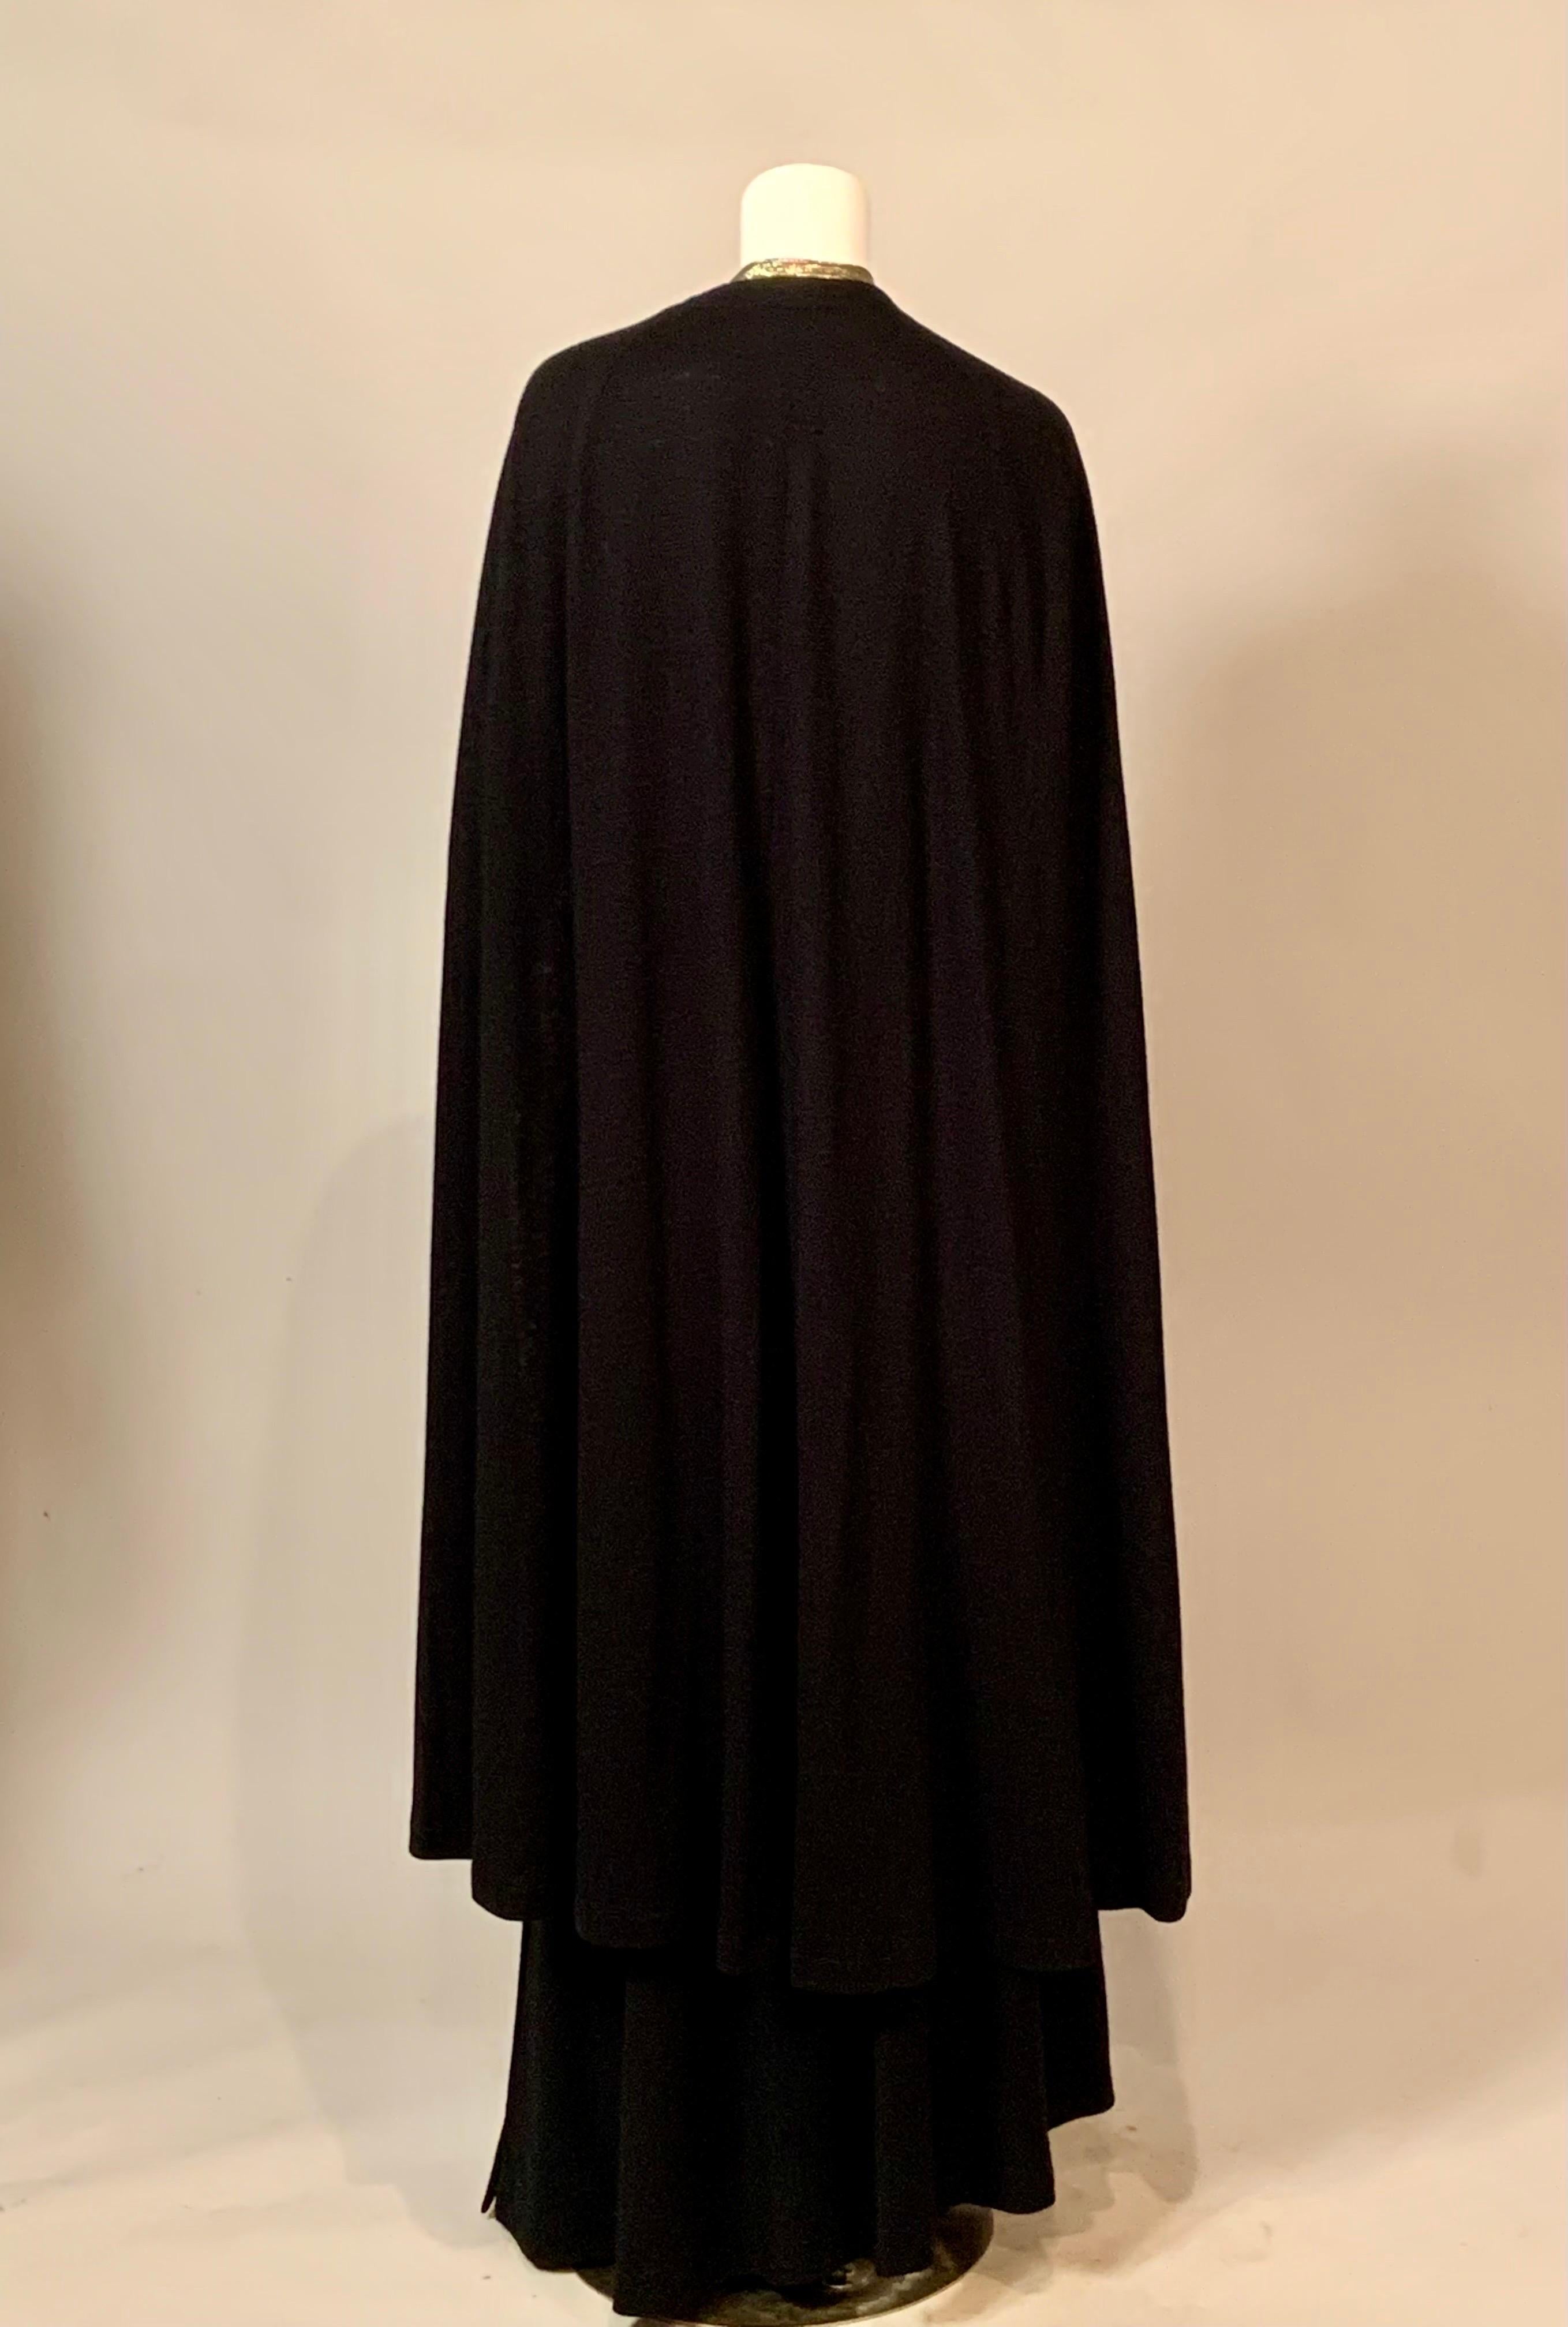 Trigere Gold Tissue Silk and Black Wool Three Piece Dress and Matching Cape For Sale 4